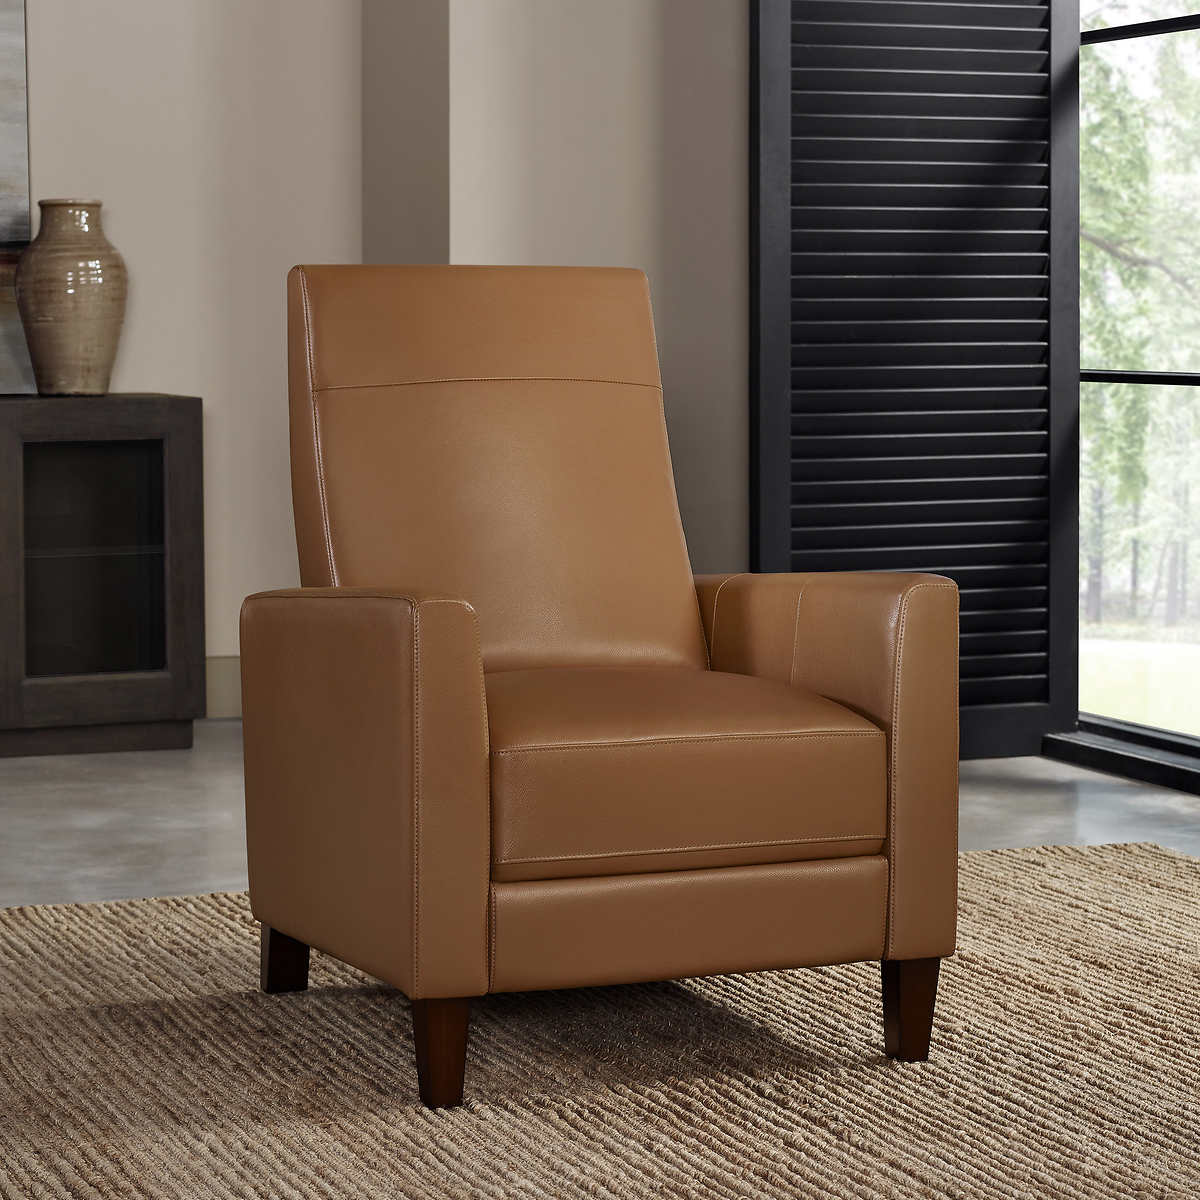 Costco - Barcalounger Ridgefield Leather Pushback Recliner - Retail $549